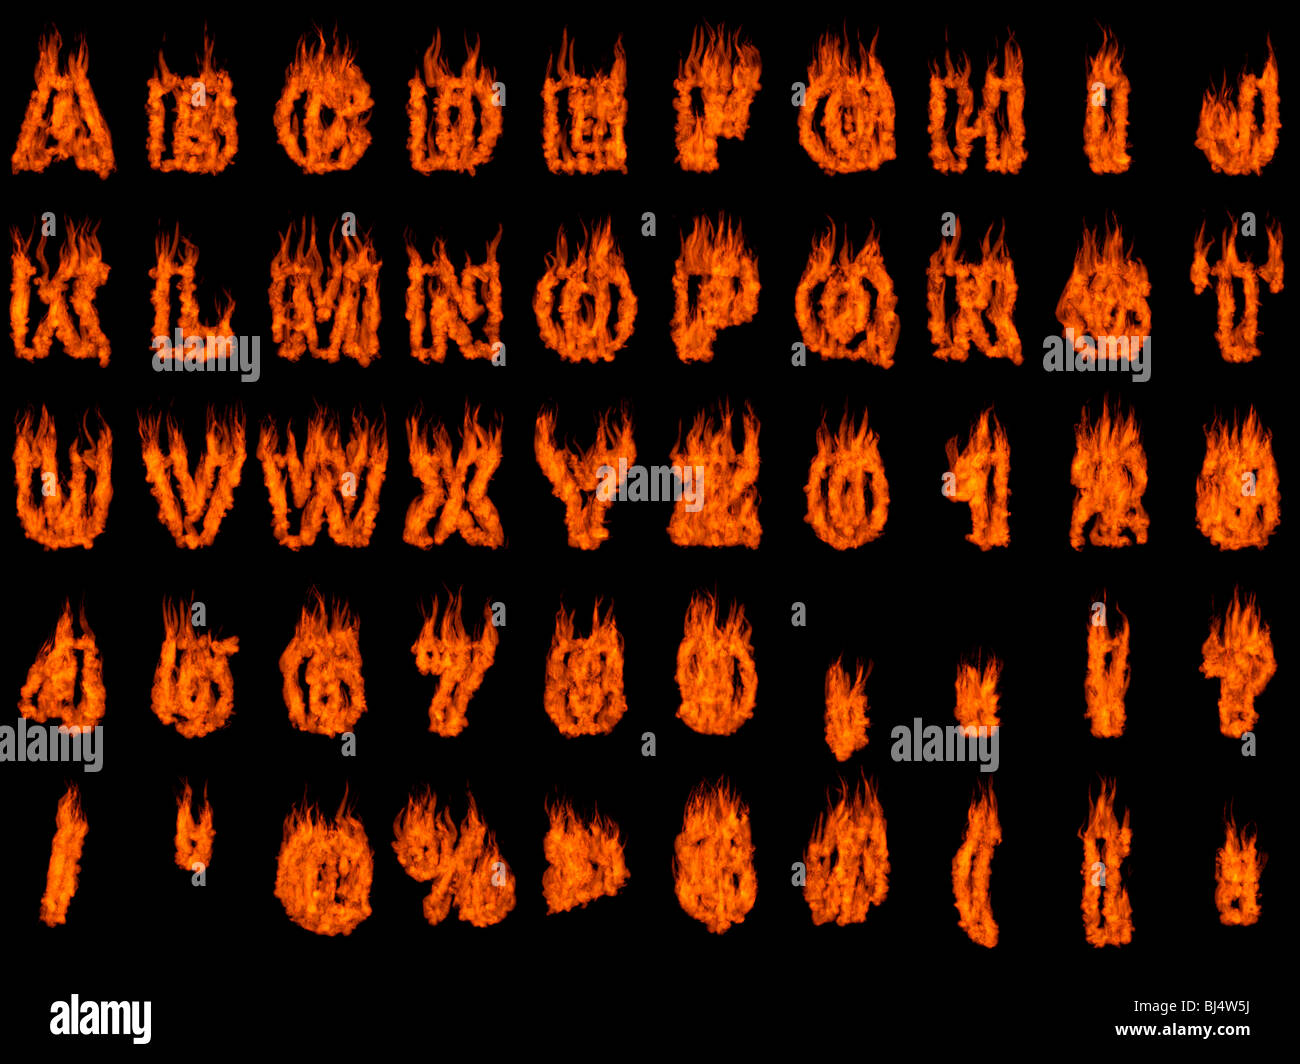 Burning alphabet letters and numbers isolated silhouettes on black background. Rendered 3D illustration Stock Photo